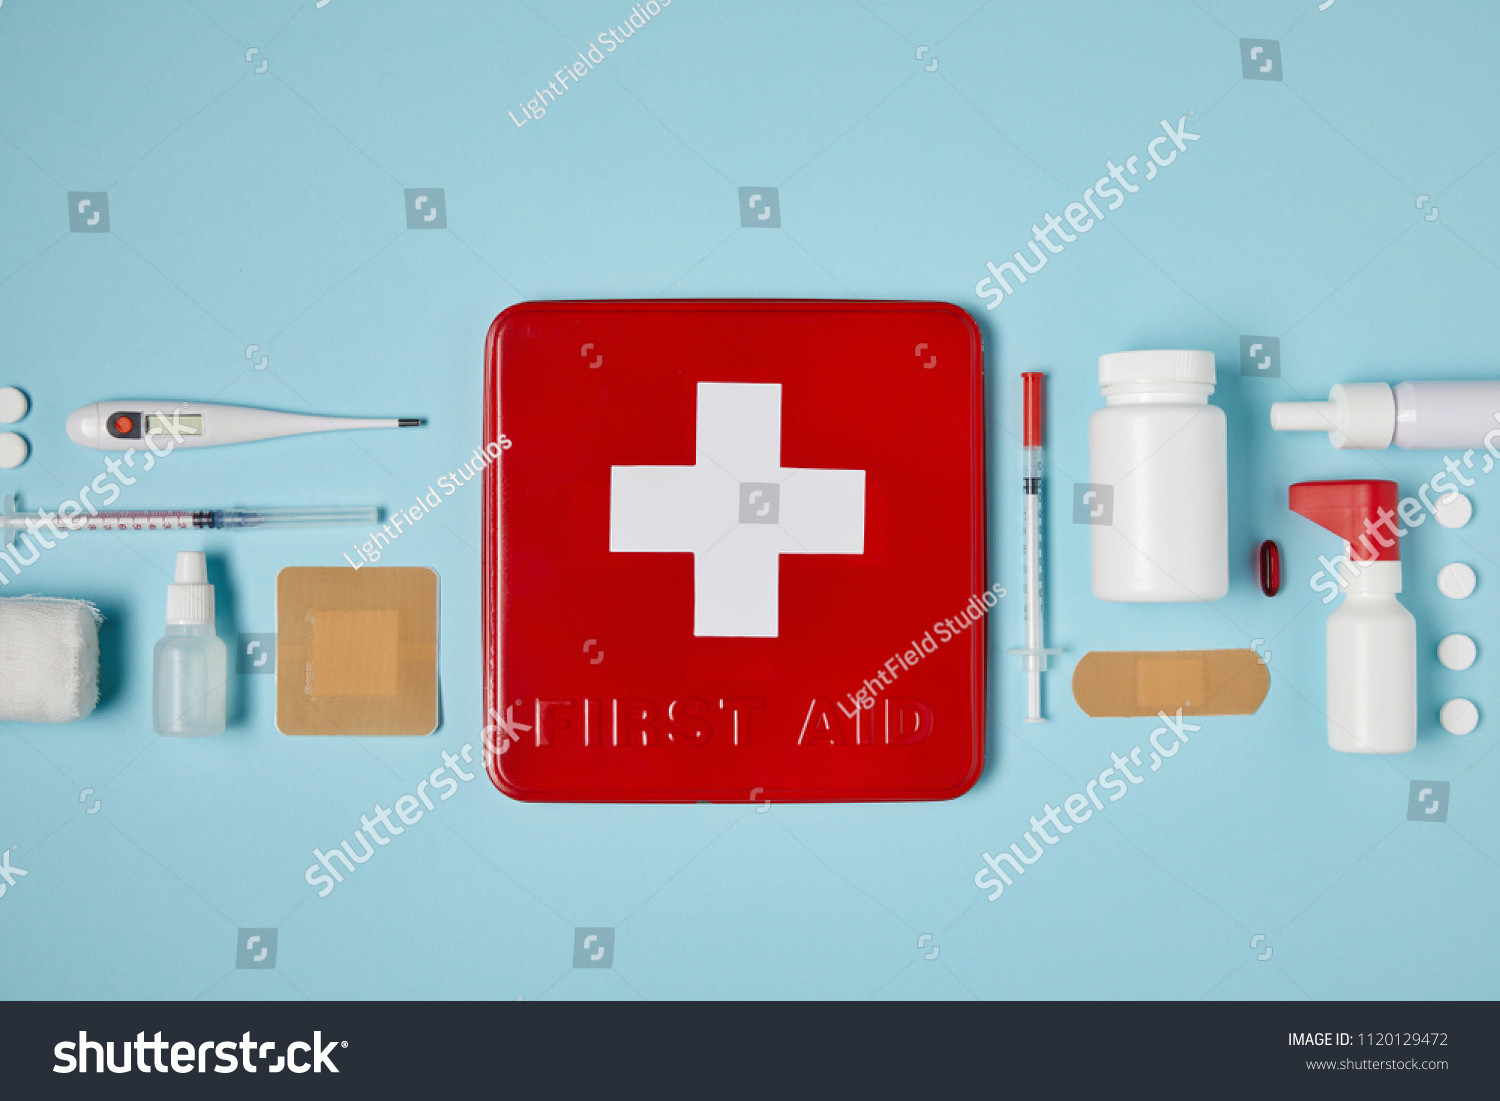 top view of red first aid kit box on blue surface with medical supplies #1120129472